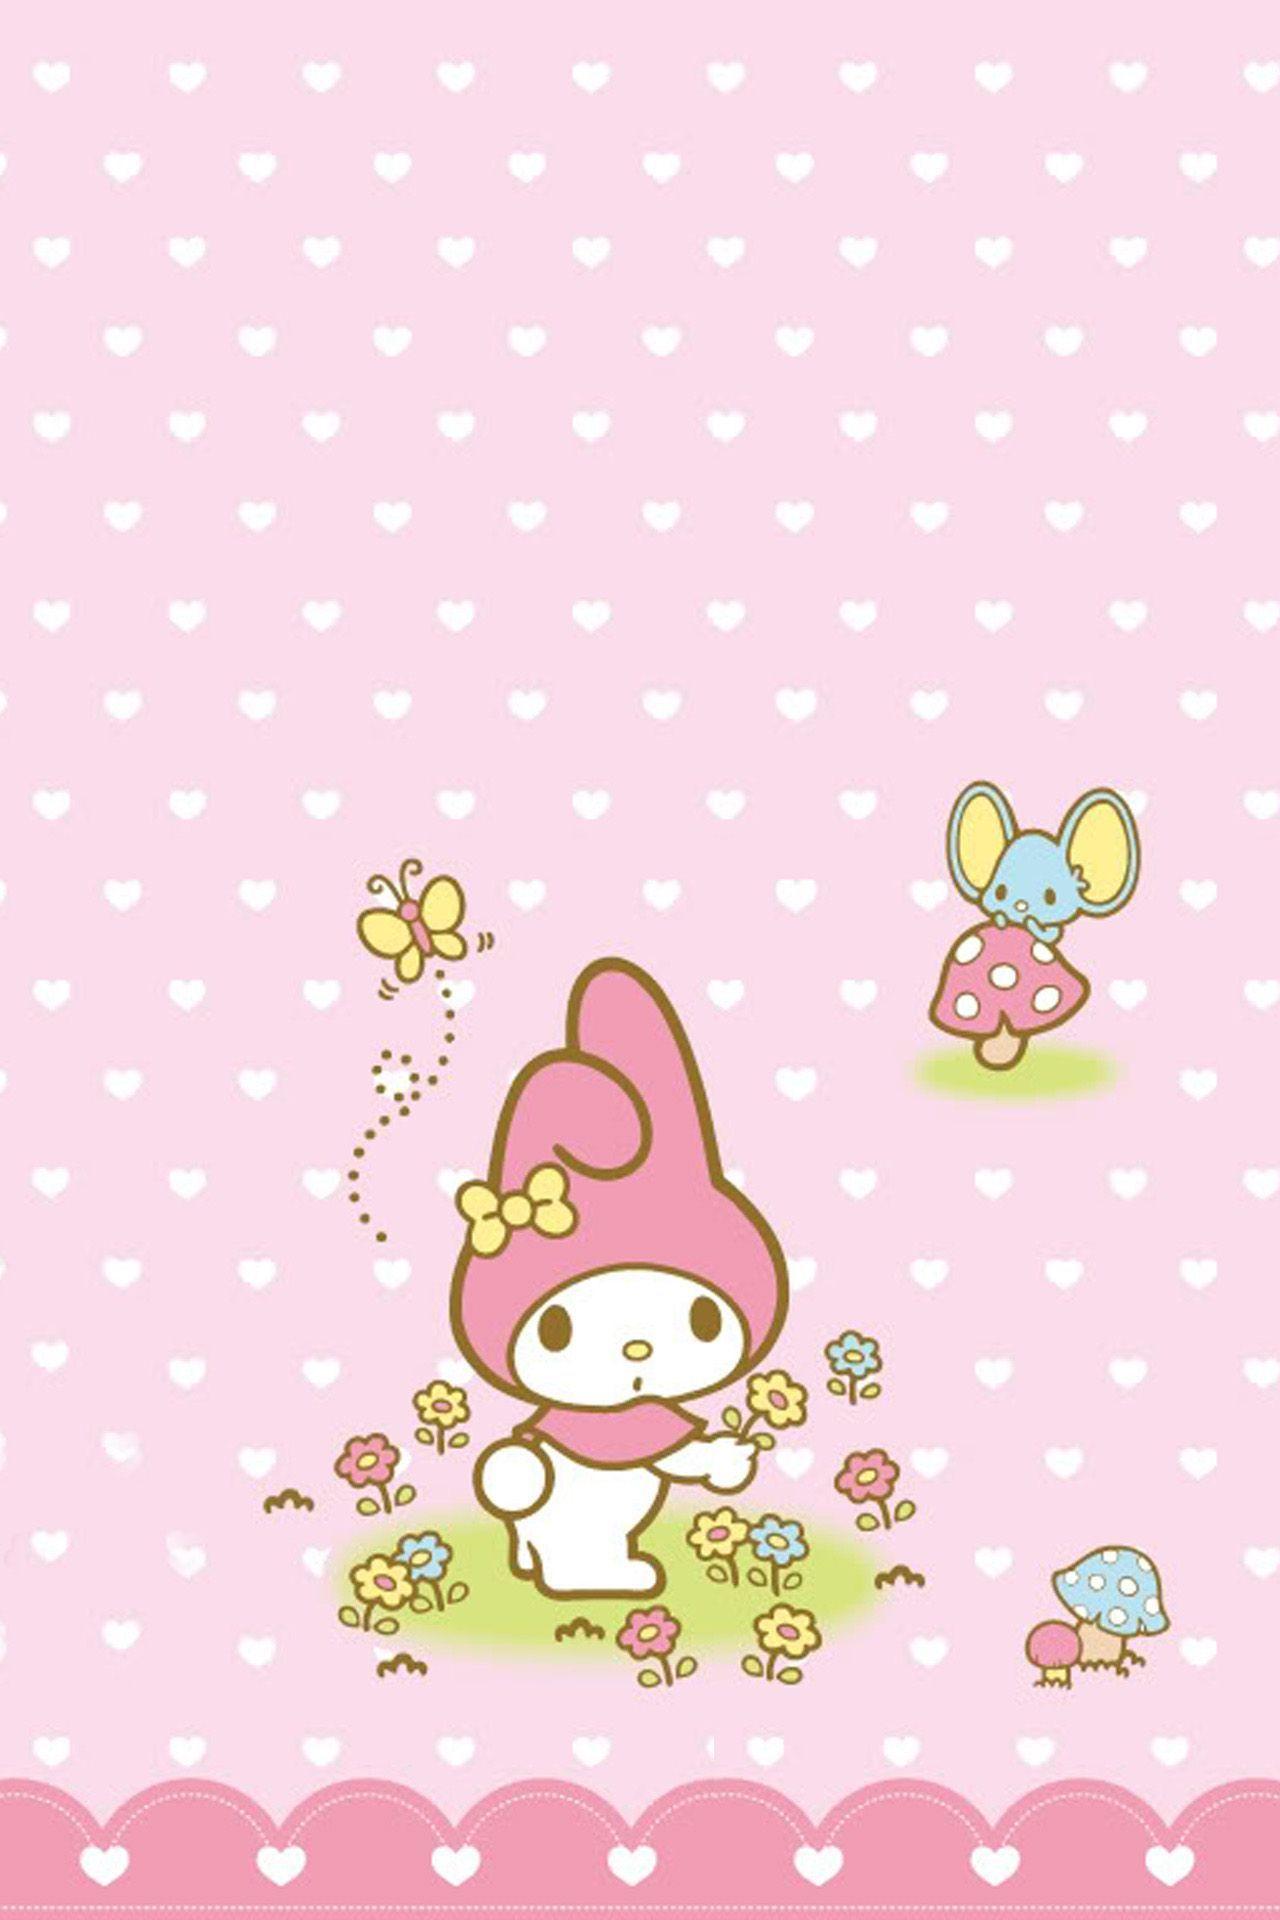 Sanrio Wallpaper. Free for iPhone and Galaxy from Lollimobile